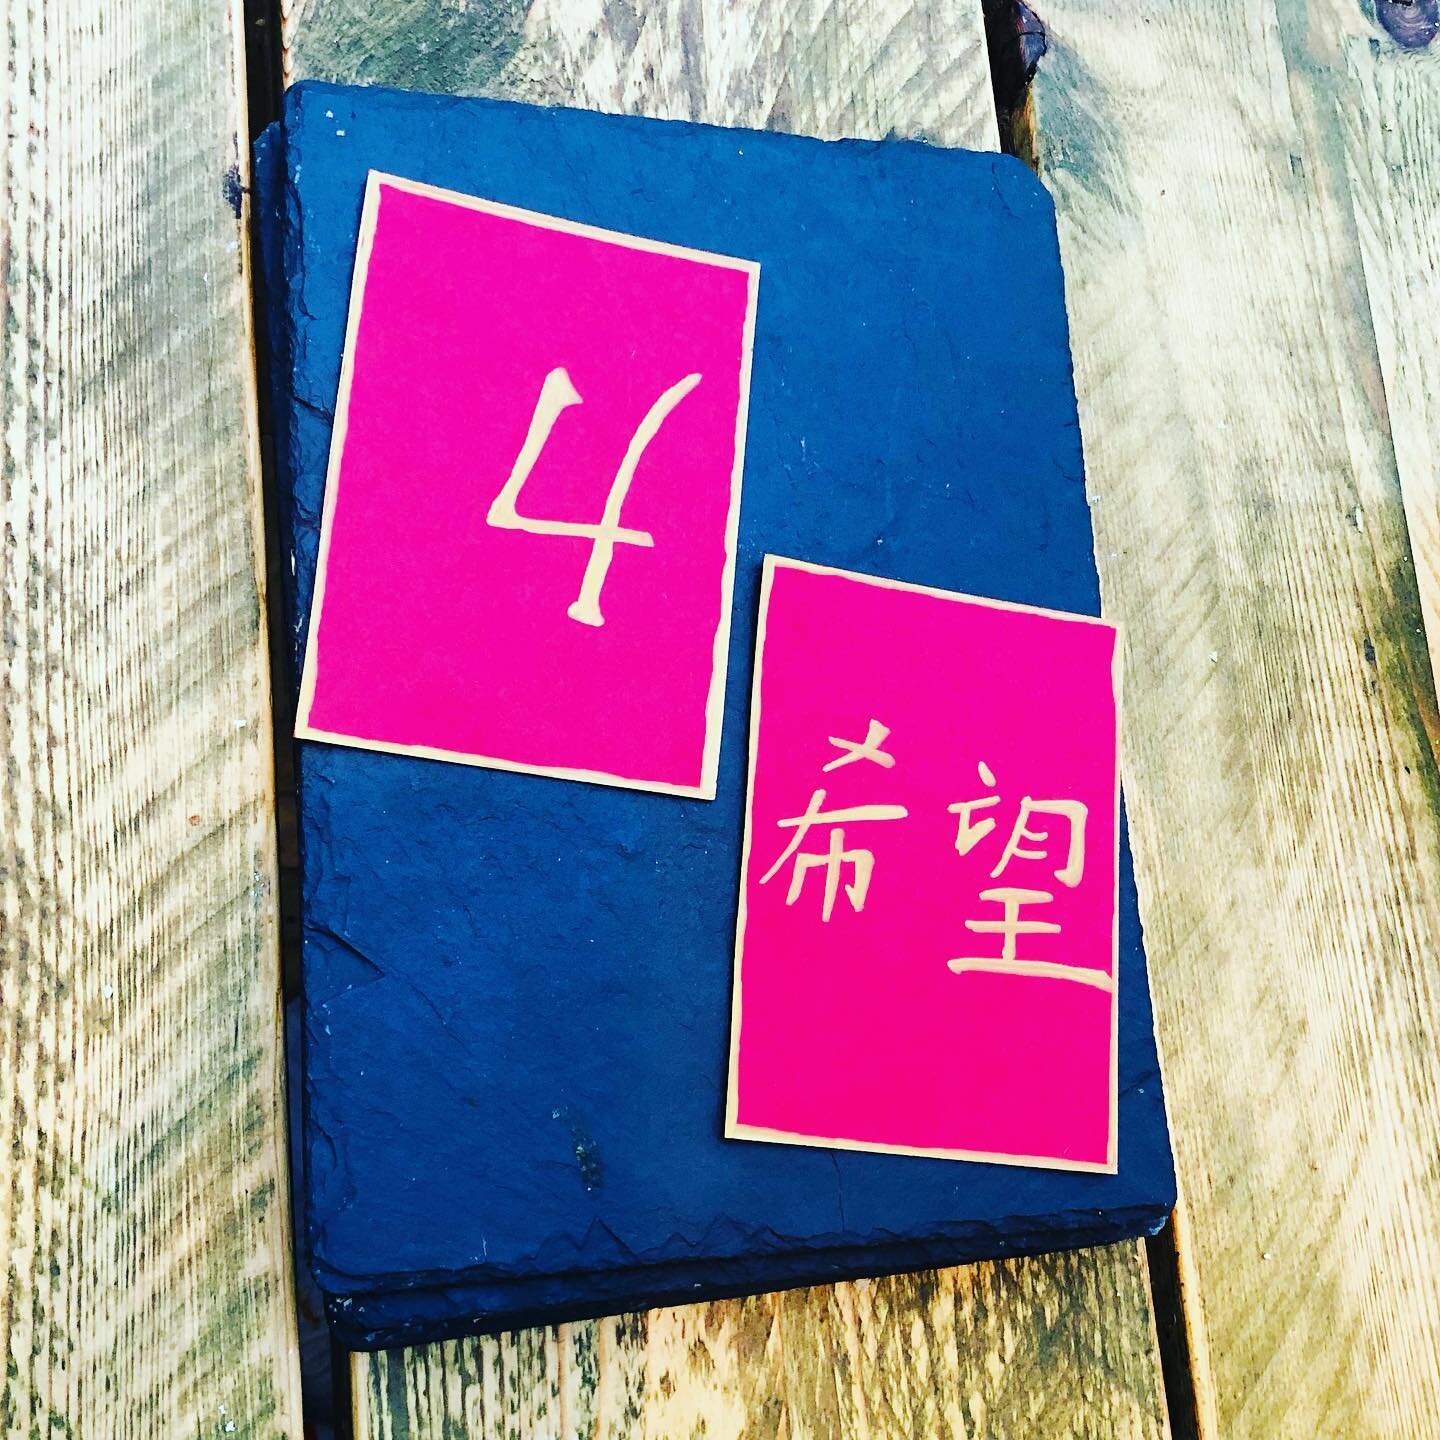 How are you staying sane in lockdown? 

I&rsquo;ve been tinkering with a bit of creativity and writing these Chinese symbols for &lsquo;hope&rsquo; and &lsquo;strength&rsquo; which we all need some of in abundance!

Another thing I&rsquo;ve been doin